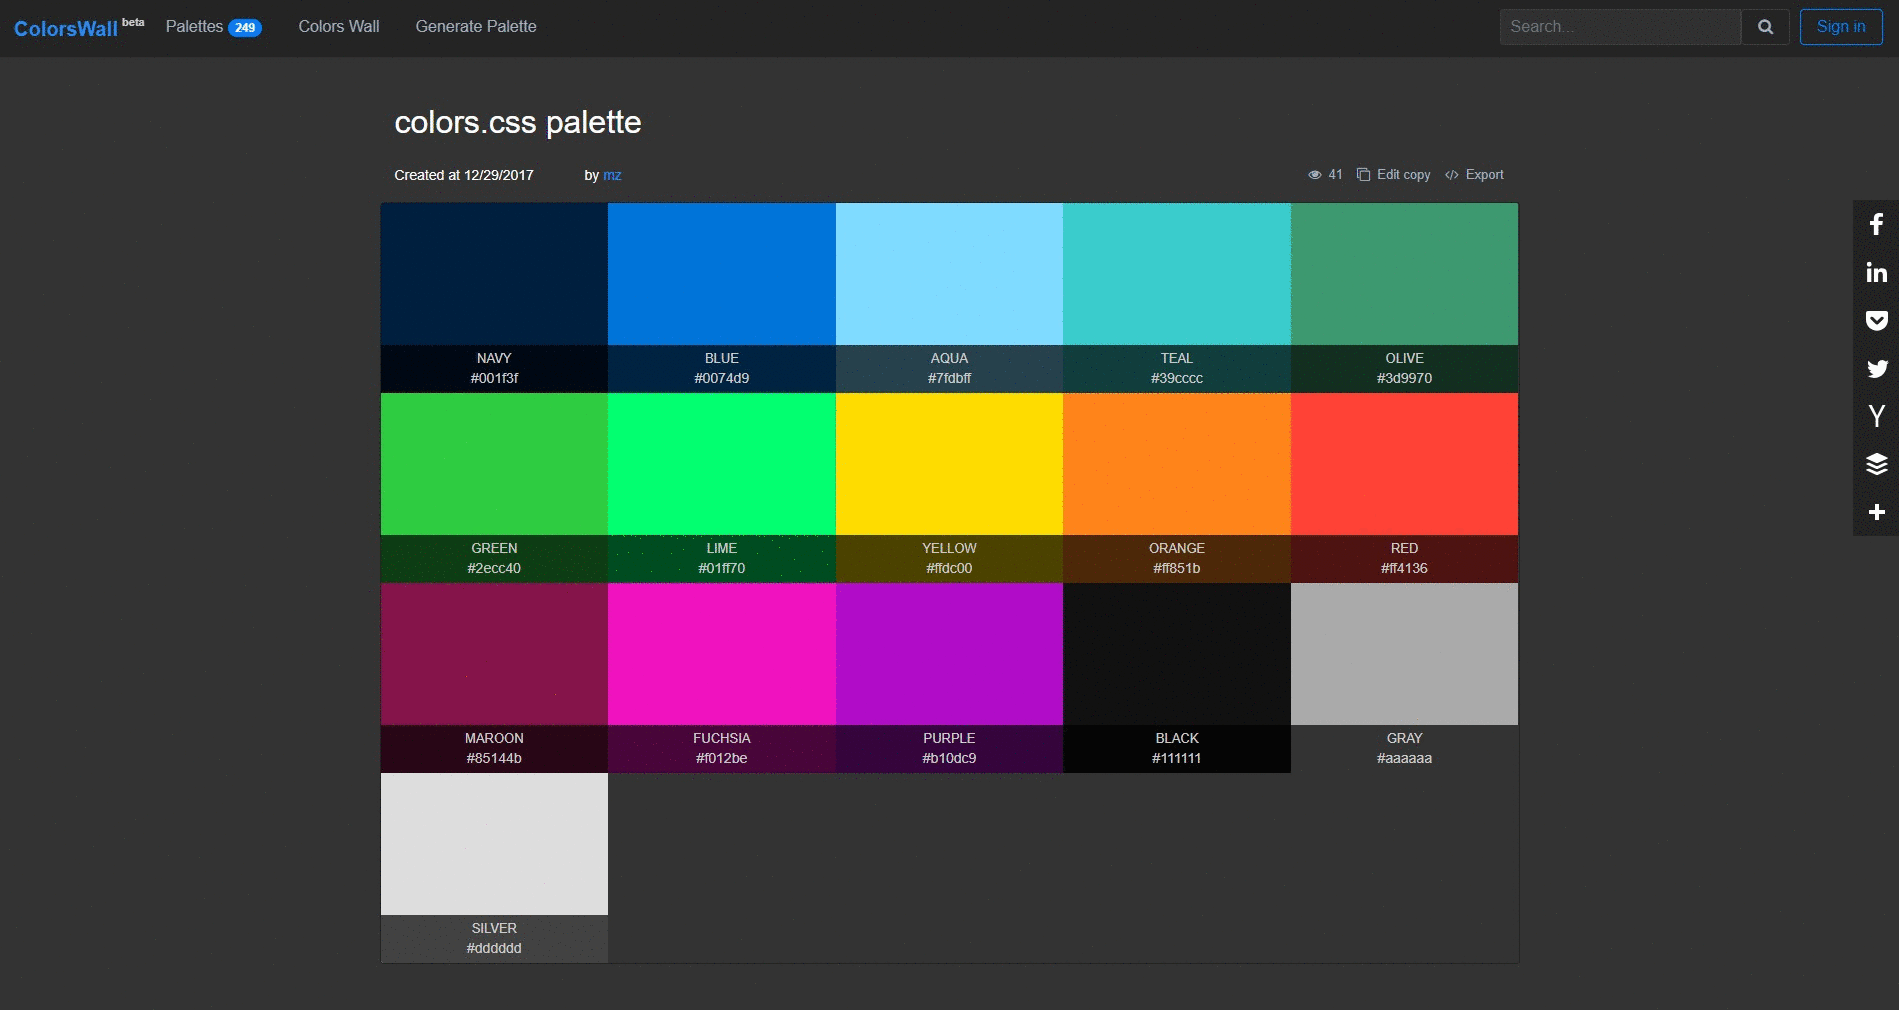 how to export colors palette to SCSS/LESS/CSS variables file